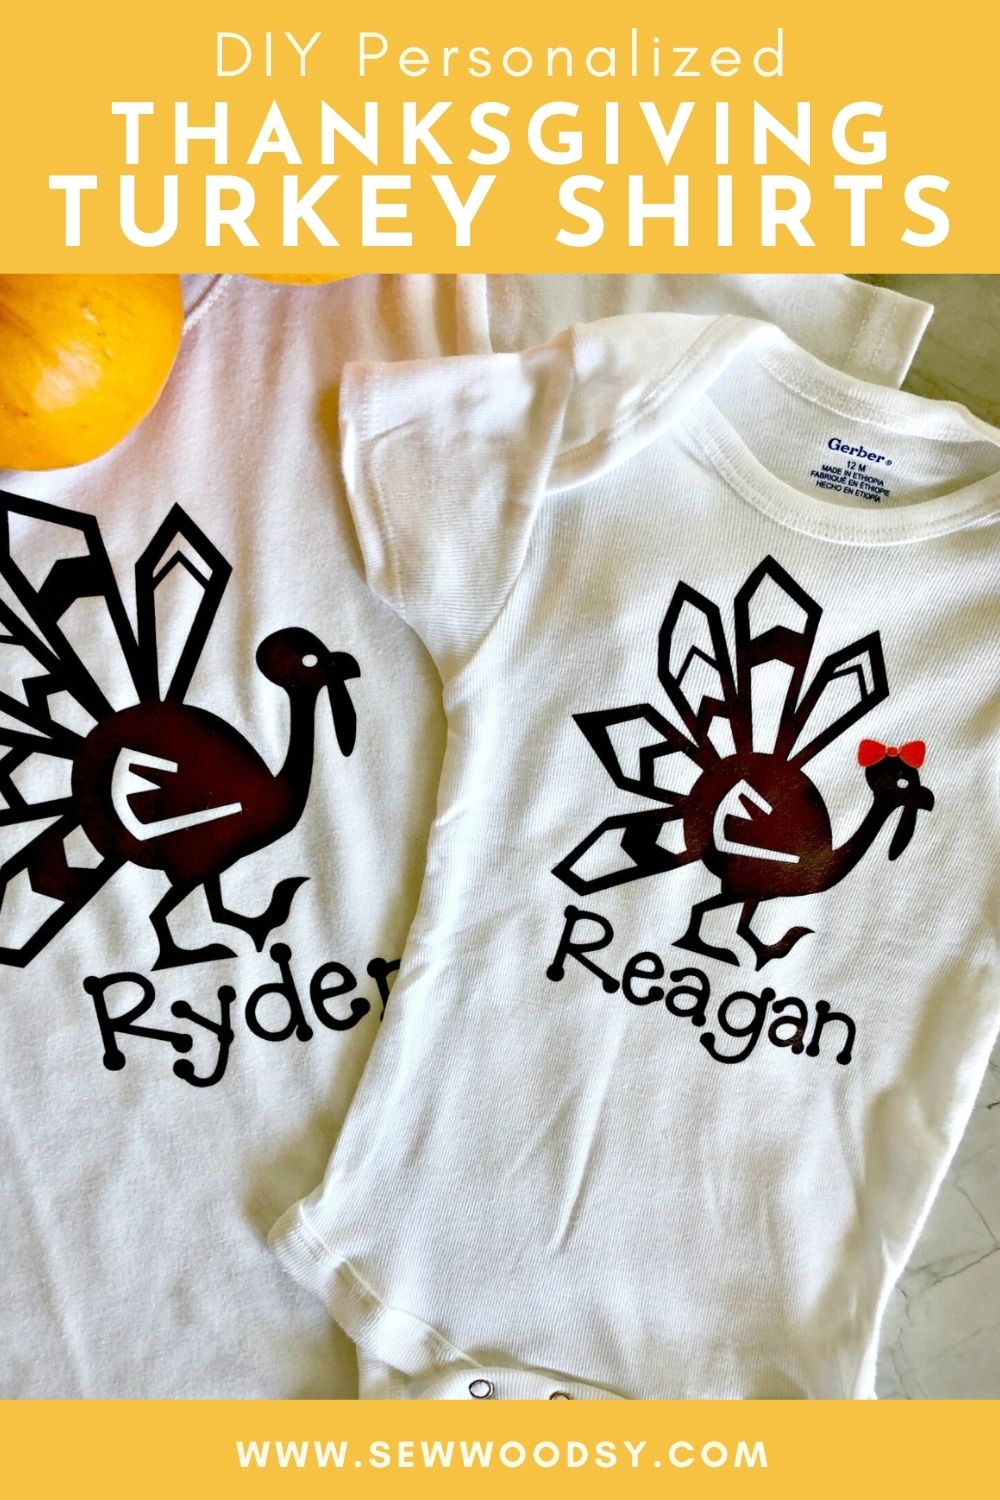 Two Thanksgiving shirts with turkeys and names on them with text on image for Pinterest.